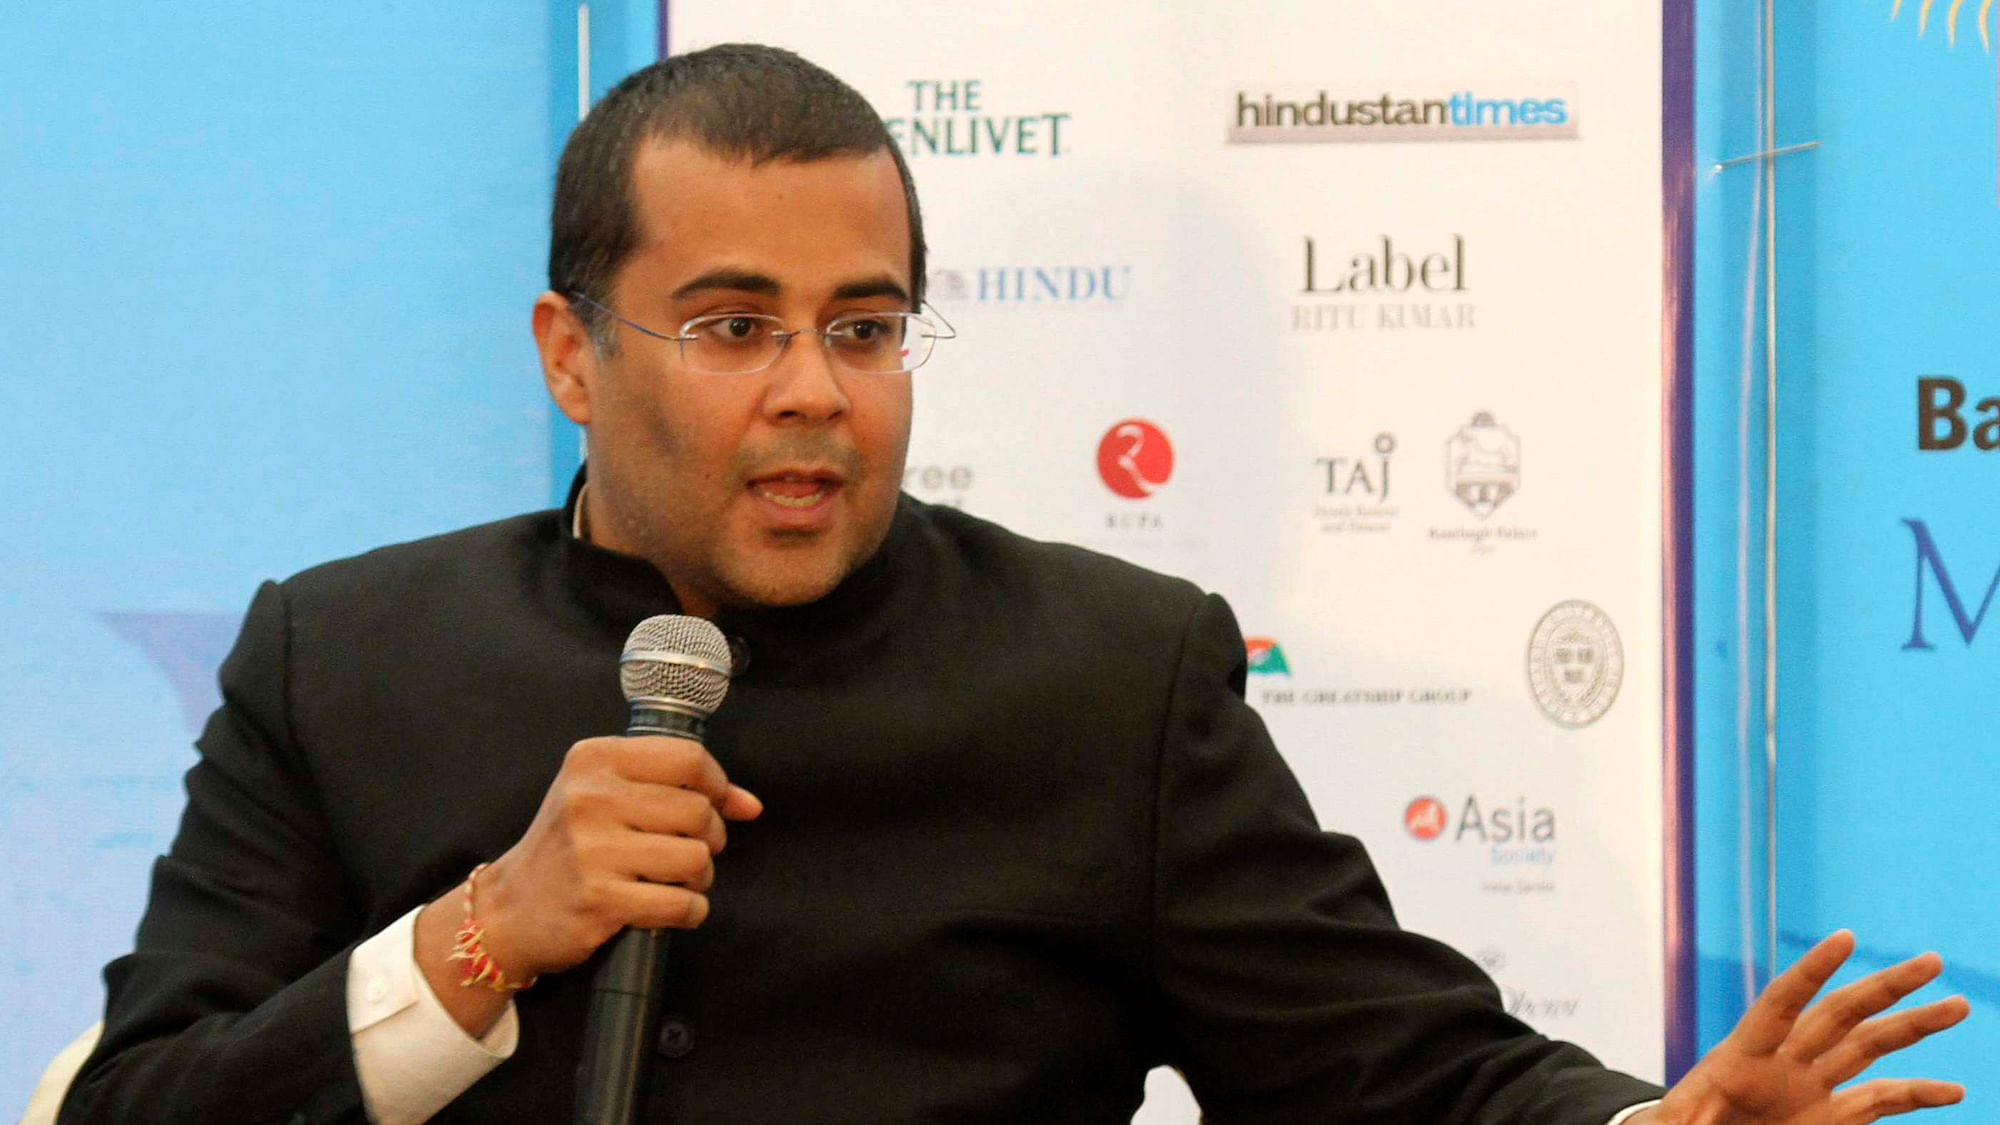 Chetan Bhagat shared his wife’s response at an event.